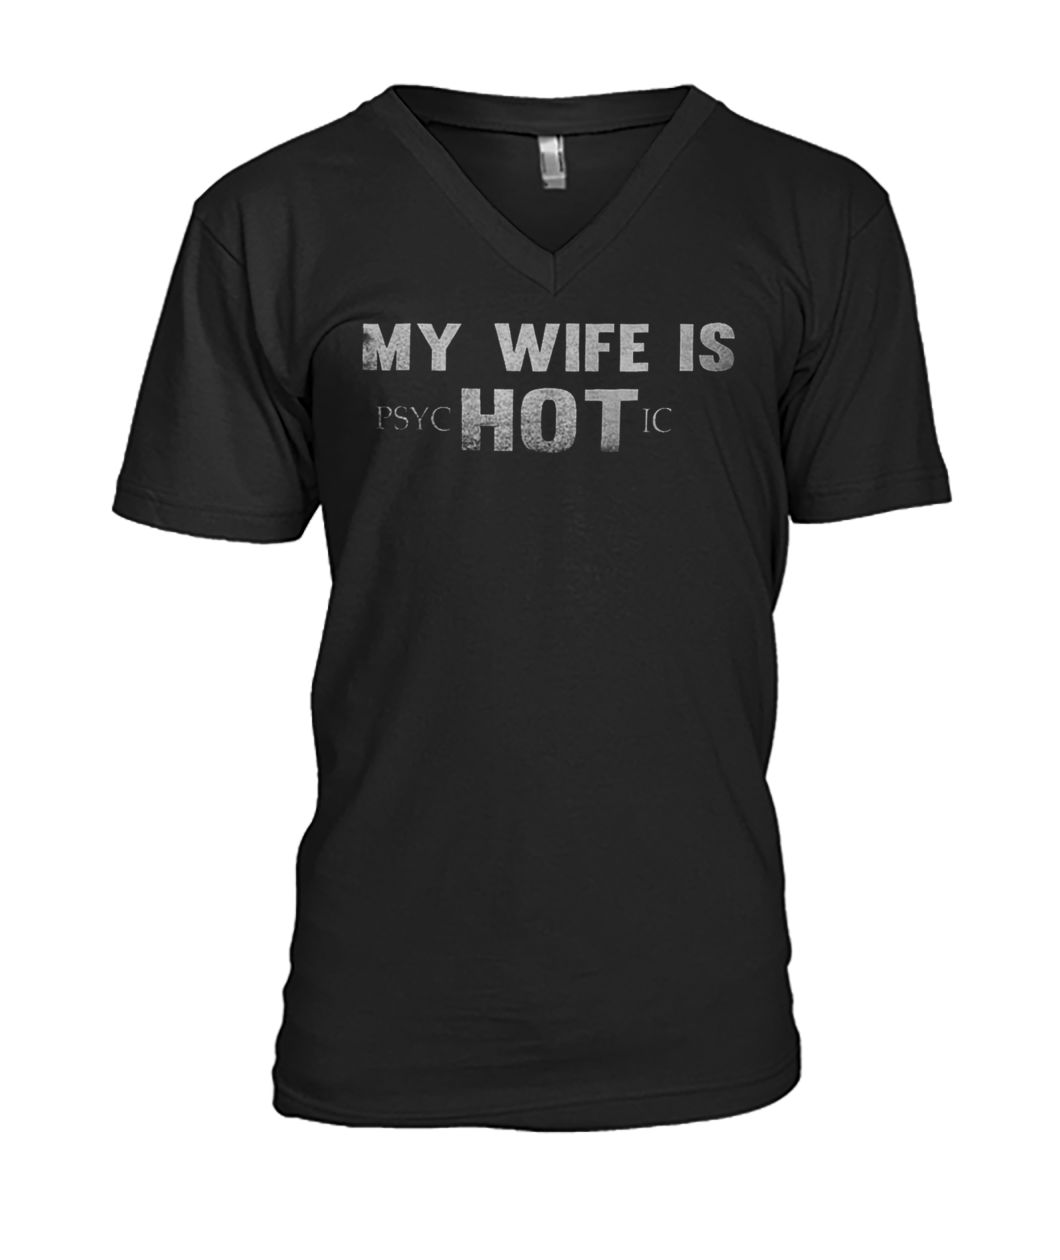 My wife is psychotic hot mens v-neck